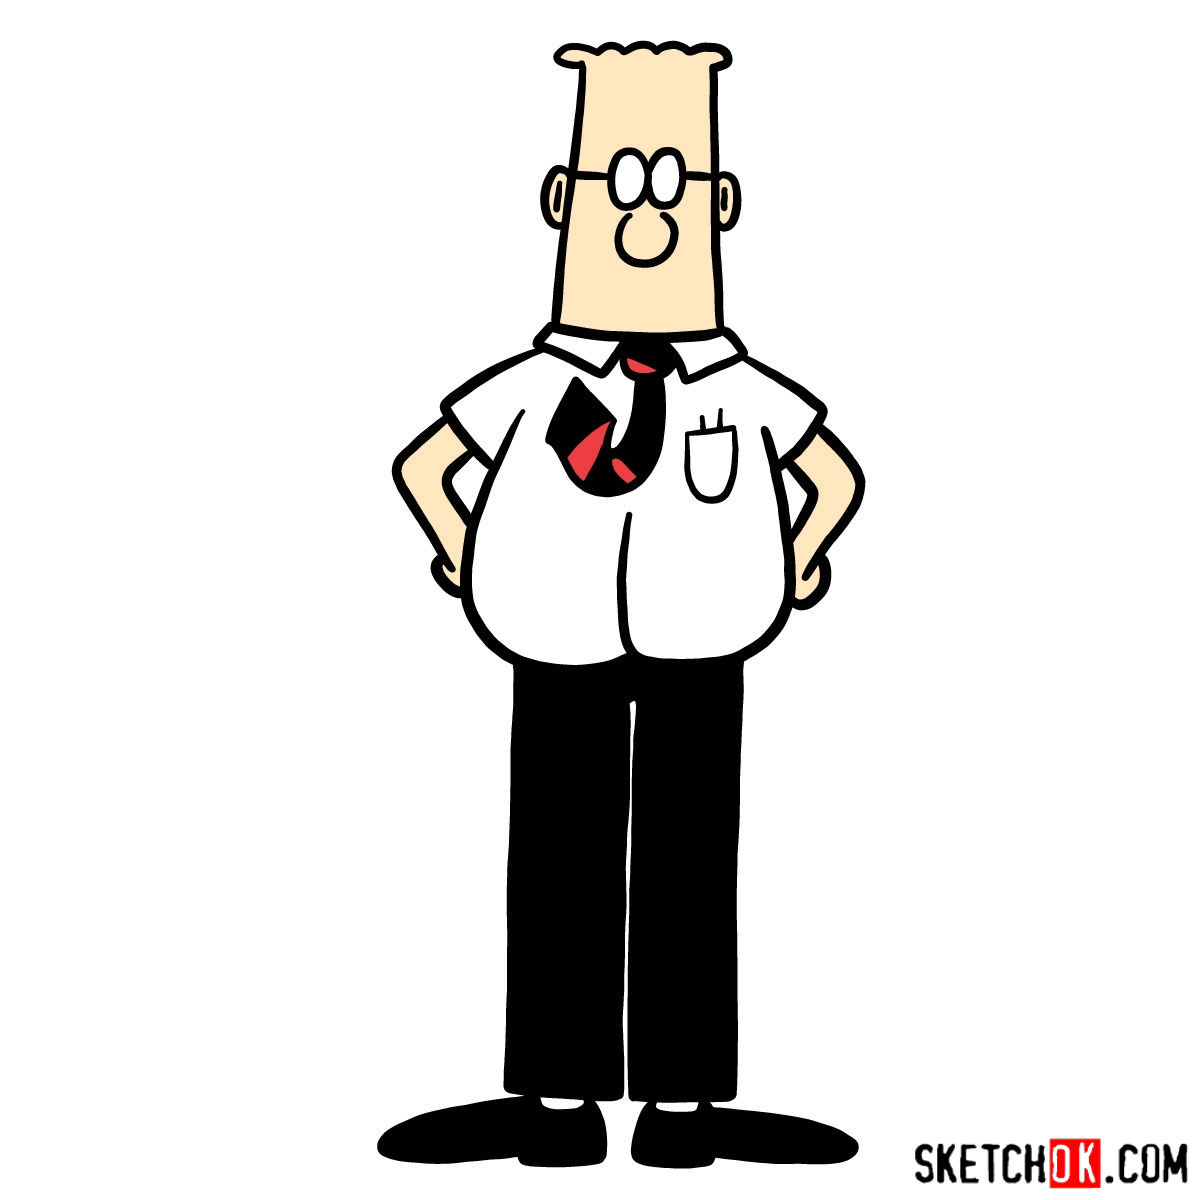 How to draw Dilbert